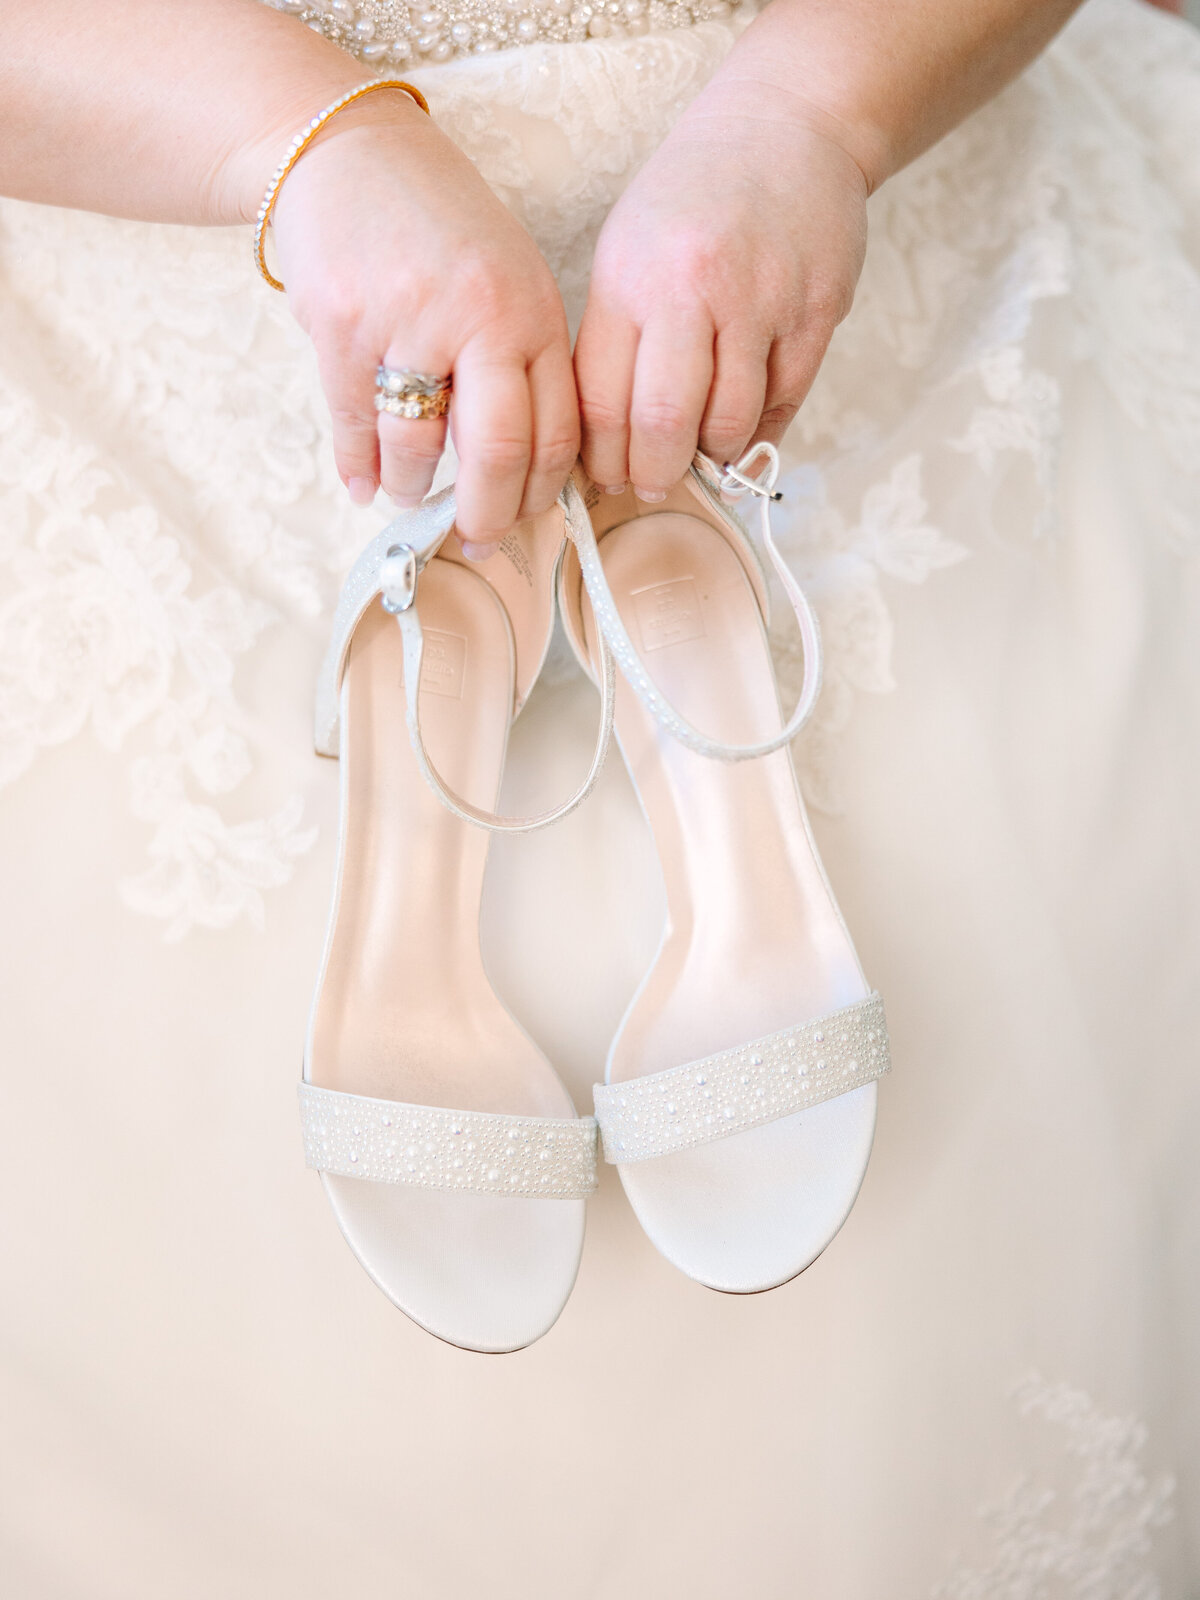 LAURA PEREZ PHOTOGRAPHY LLC EPPING FOREST YACHT CLUB WEDDINGS ADINA AND WES-37